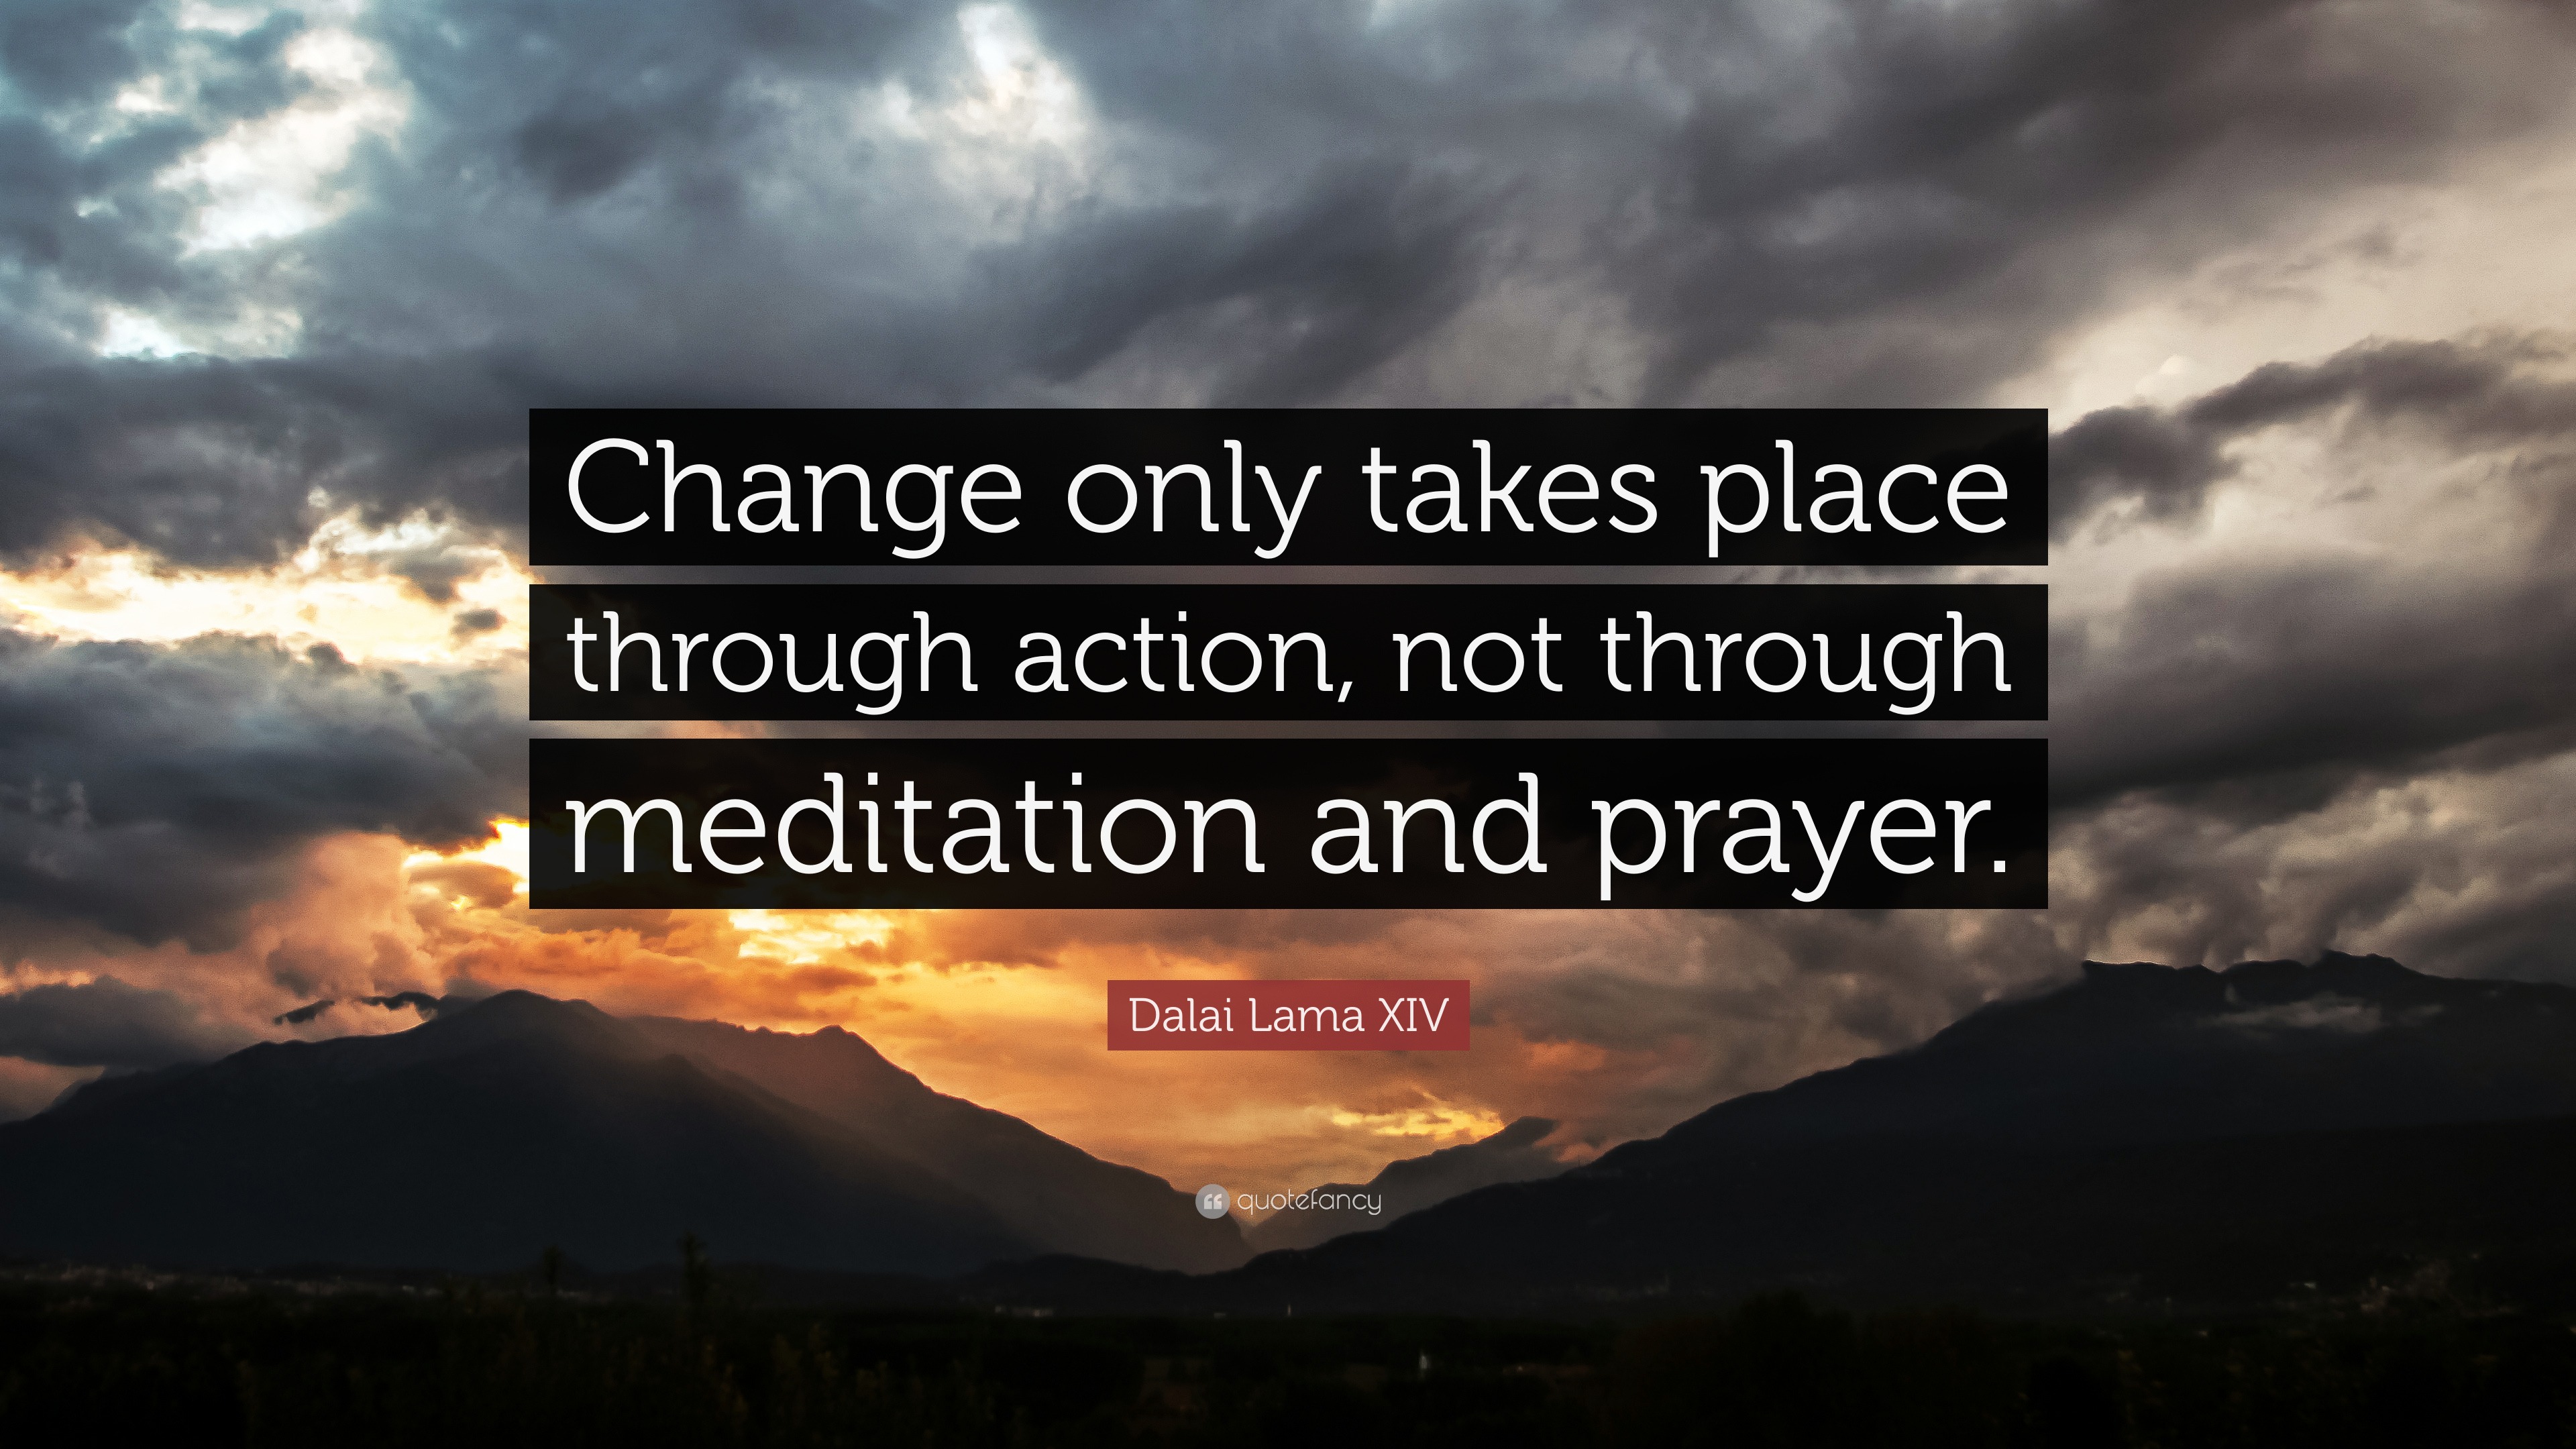 Dalai Lama XIV Quote: “Change only takes place through action, not